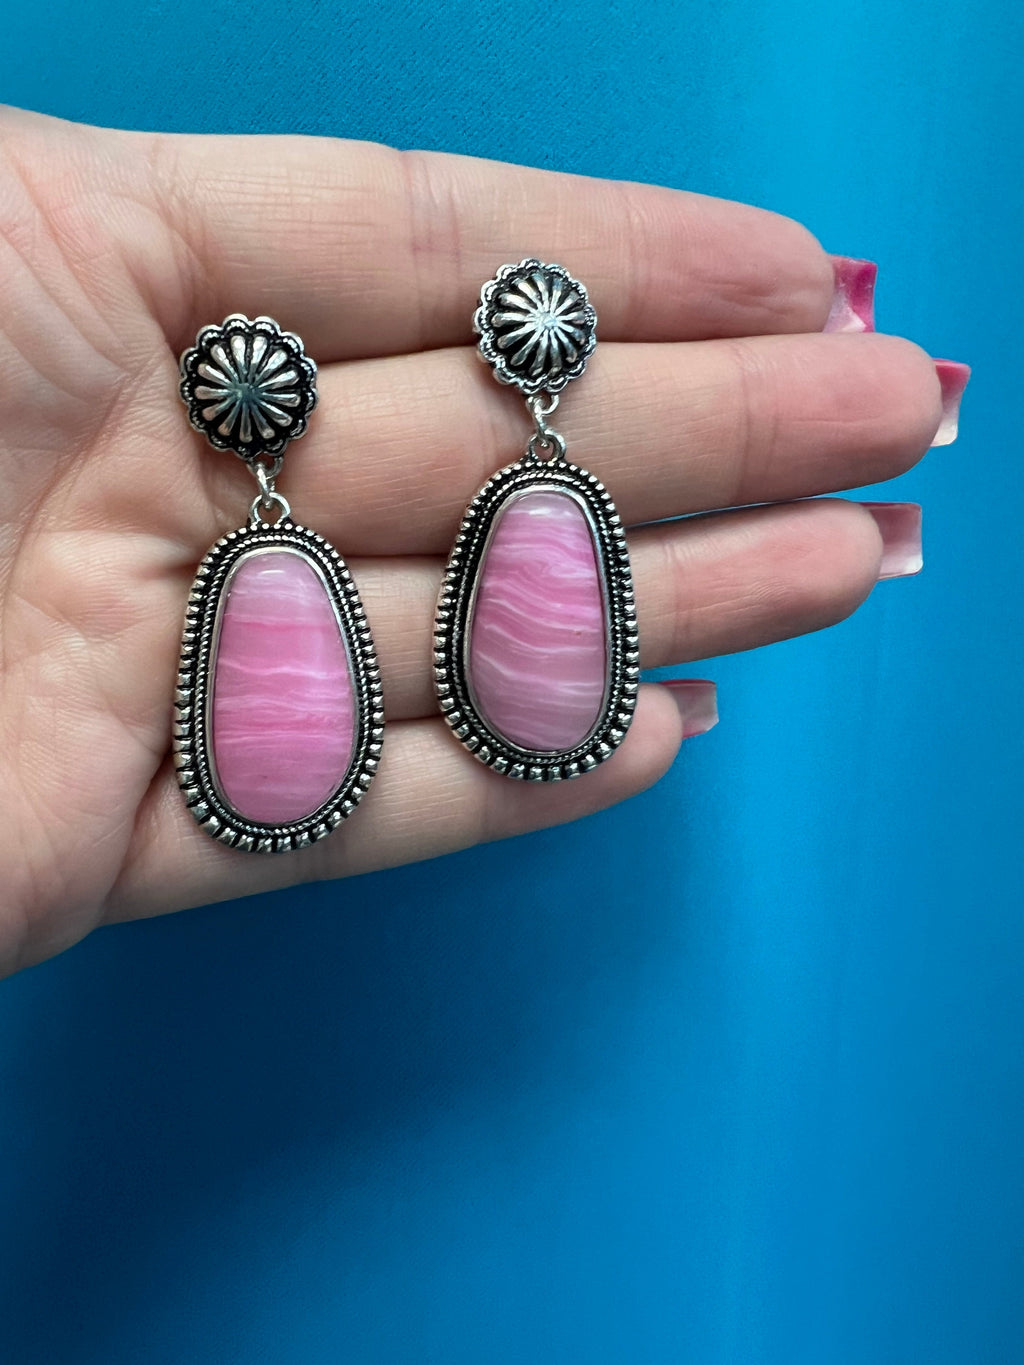 how off your Lone Star State pride with these chic Texas Rose Earrings! Made with polished silver and western-style concho, these dangly and elegant earrings feature an oval-shape, pink stone center for a touch of blushing color. Don't miss out on these two-inch stunners! Yeehaw!